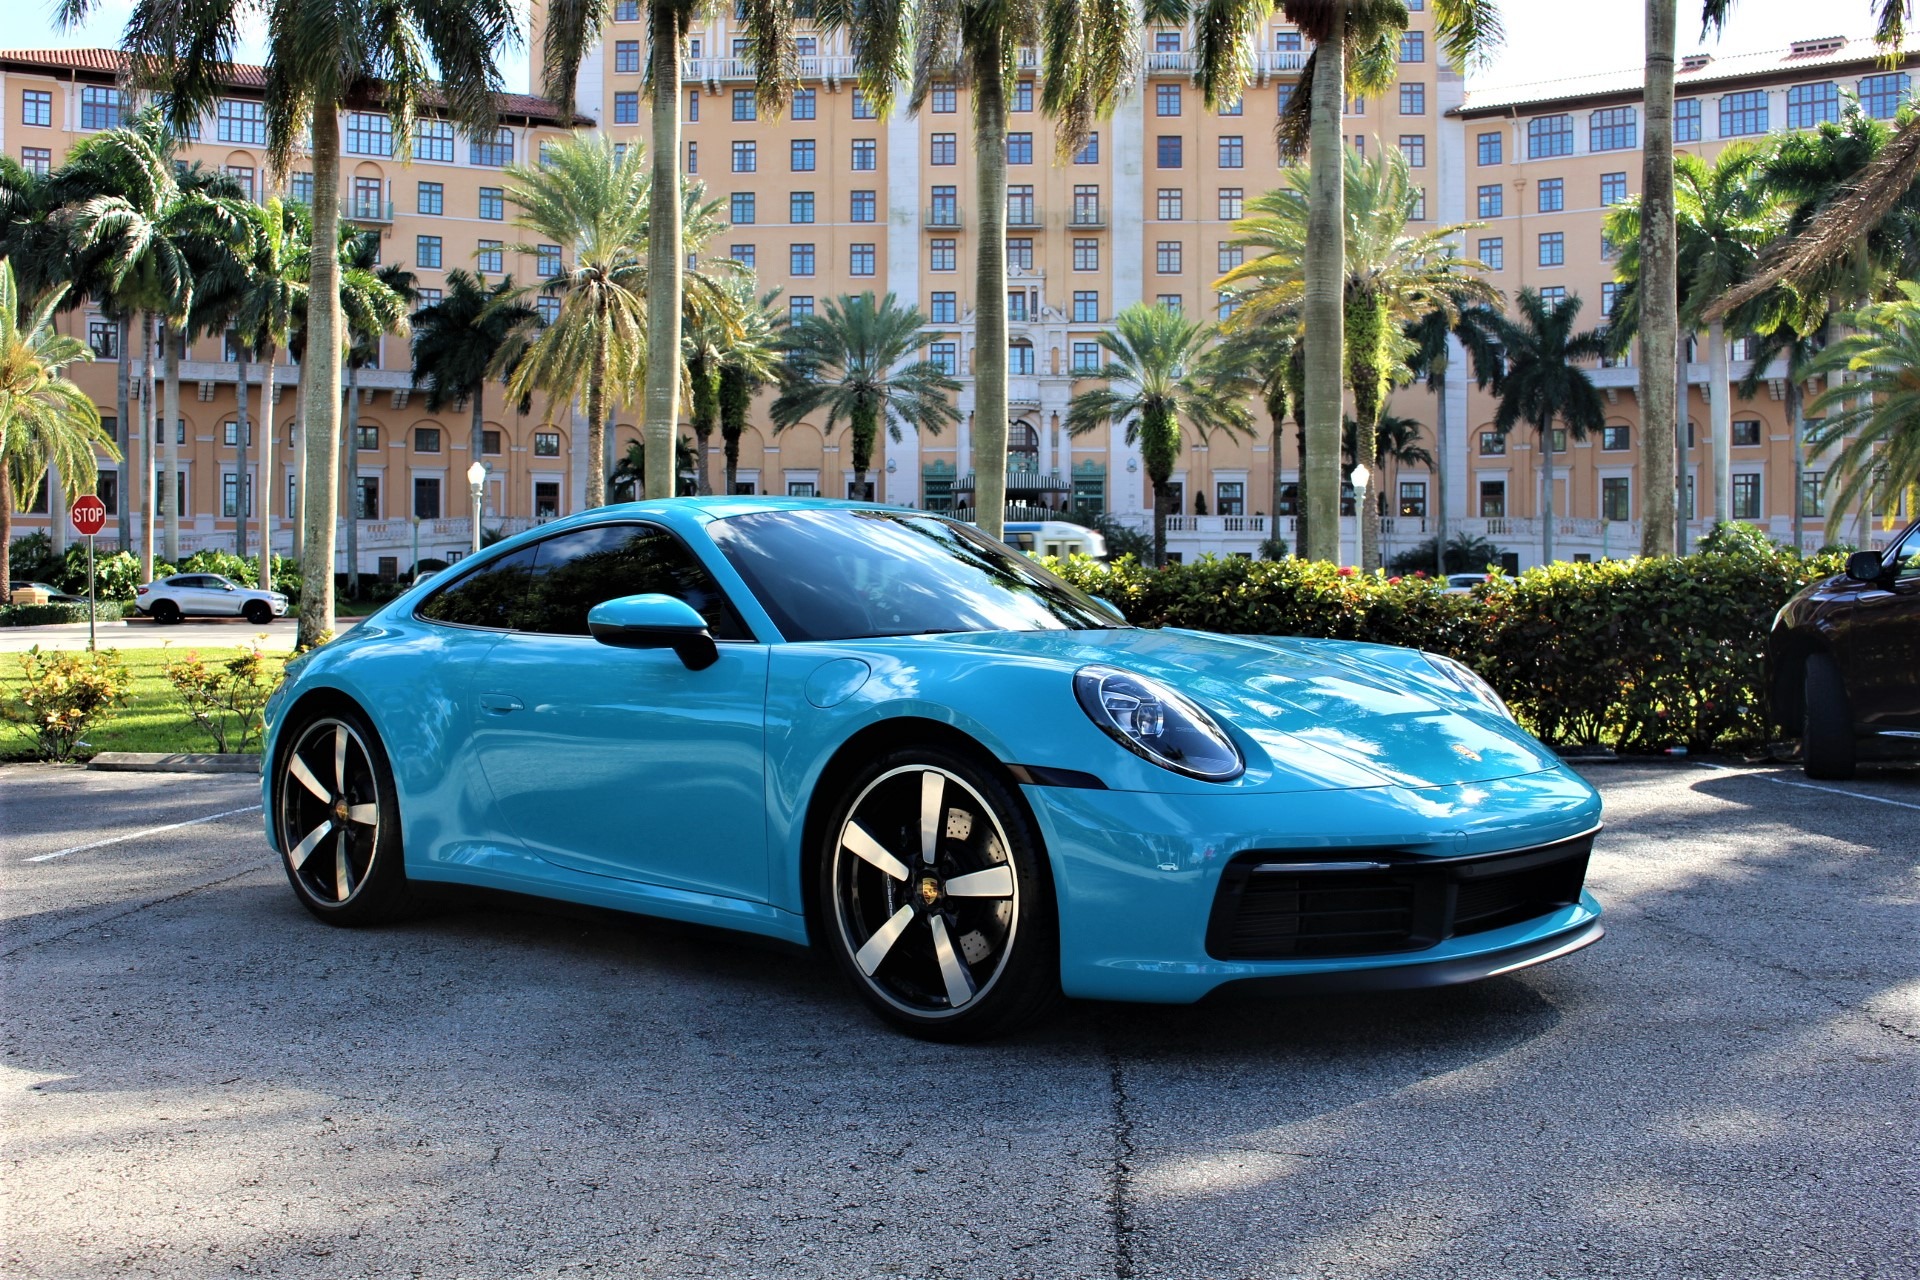 Used 2020 Porsche 911 Carrera 4S for sale Sold at The Gables Sports Cars in Miami FL 33146 1